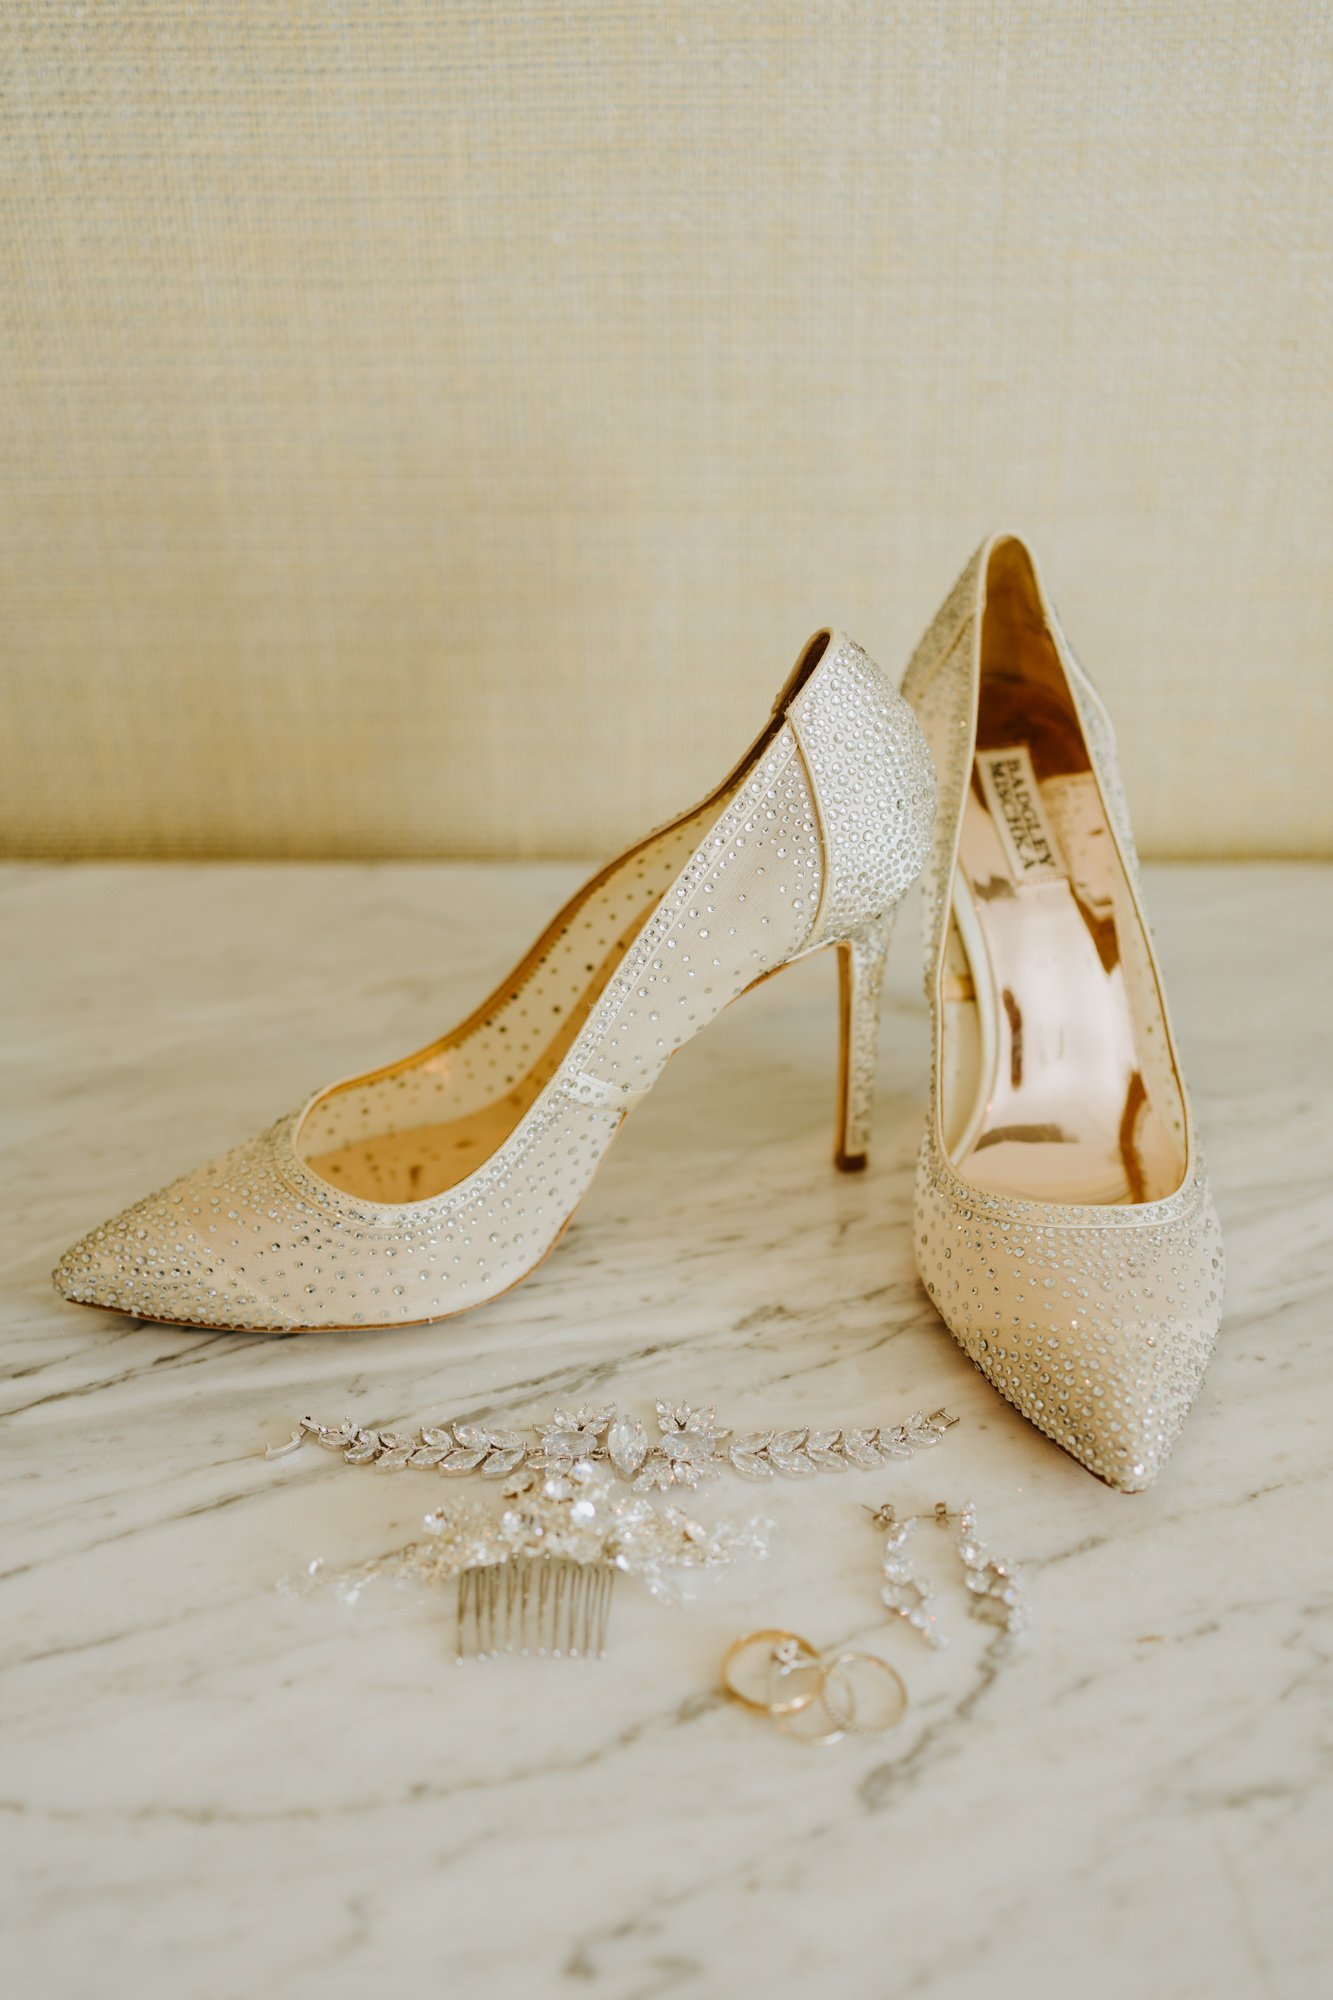 Bride details badgley mischka shoes and jewelry at The O’Donnell House Palm Springs Wedding Photography by Tida Svy, www.tidasvy.com